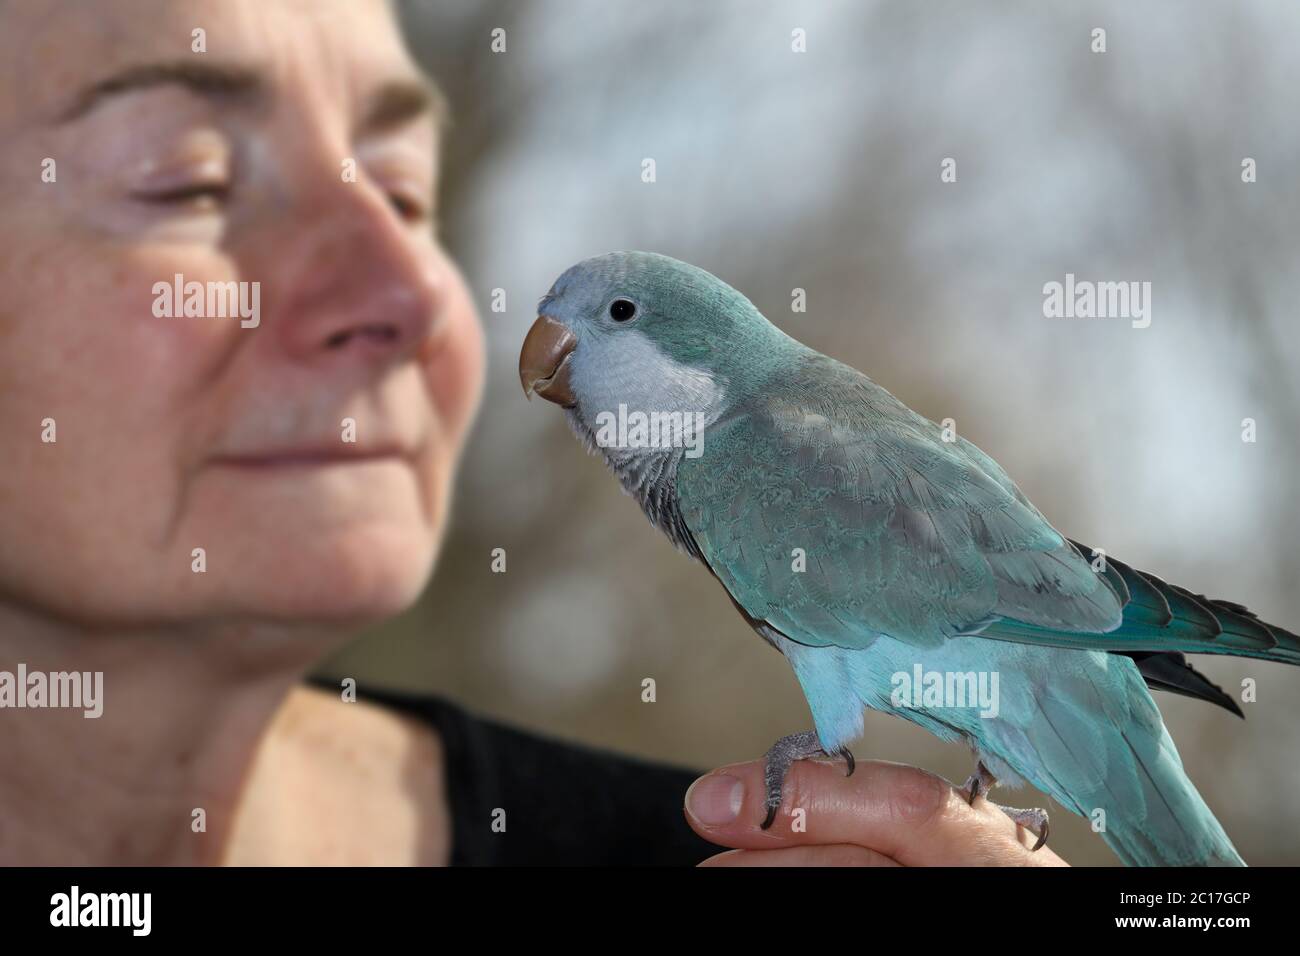 Male Quaker Parrot pet with blue mutation near the face of a smiling retired female owner Stock Photo